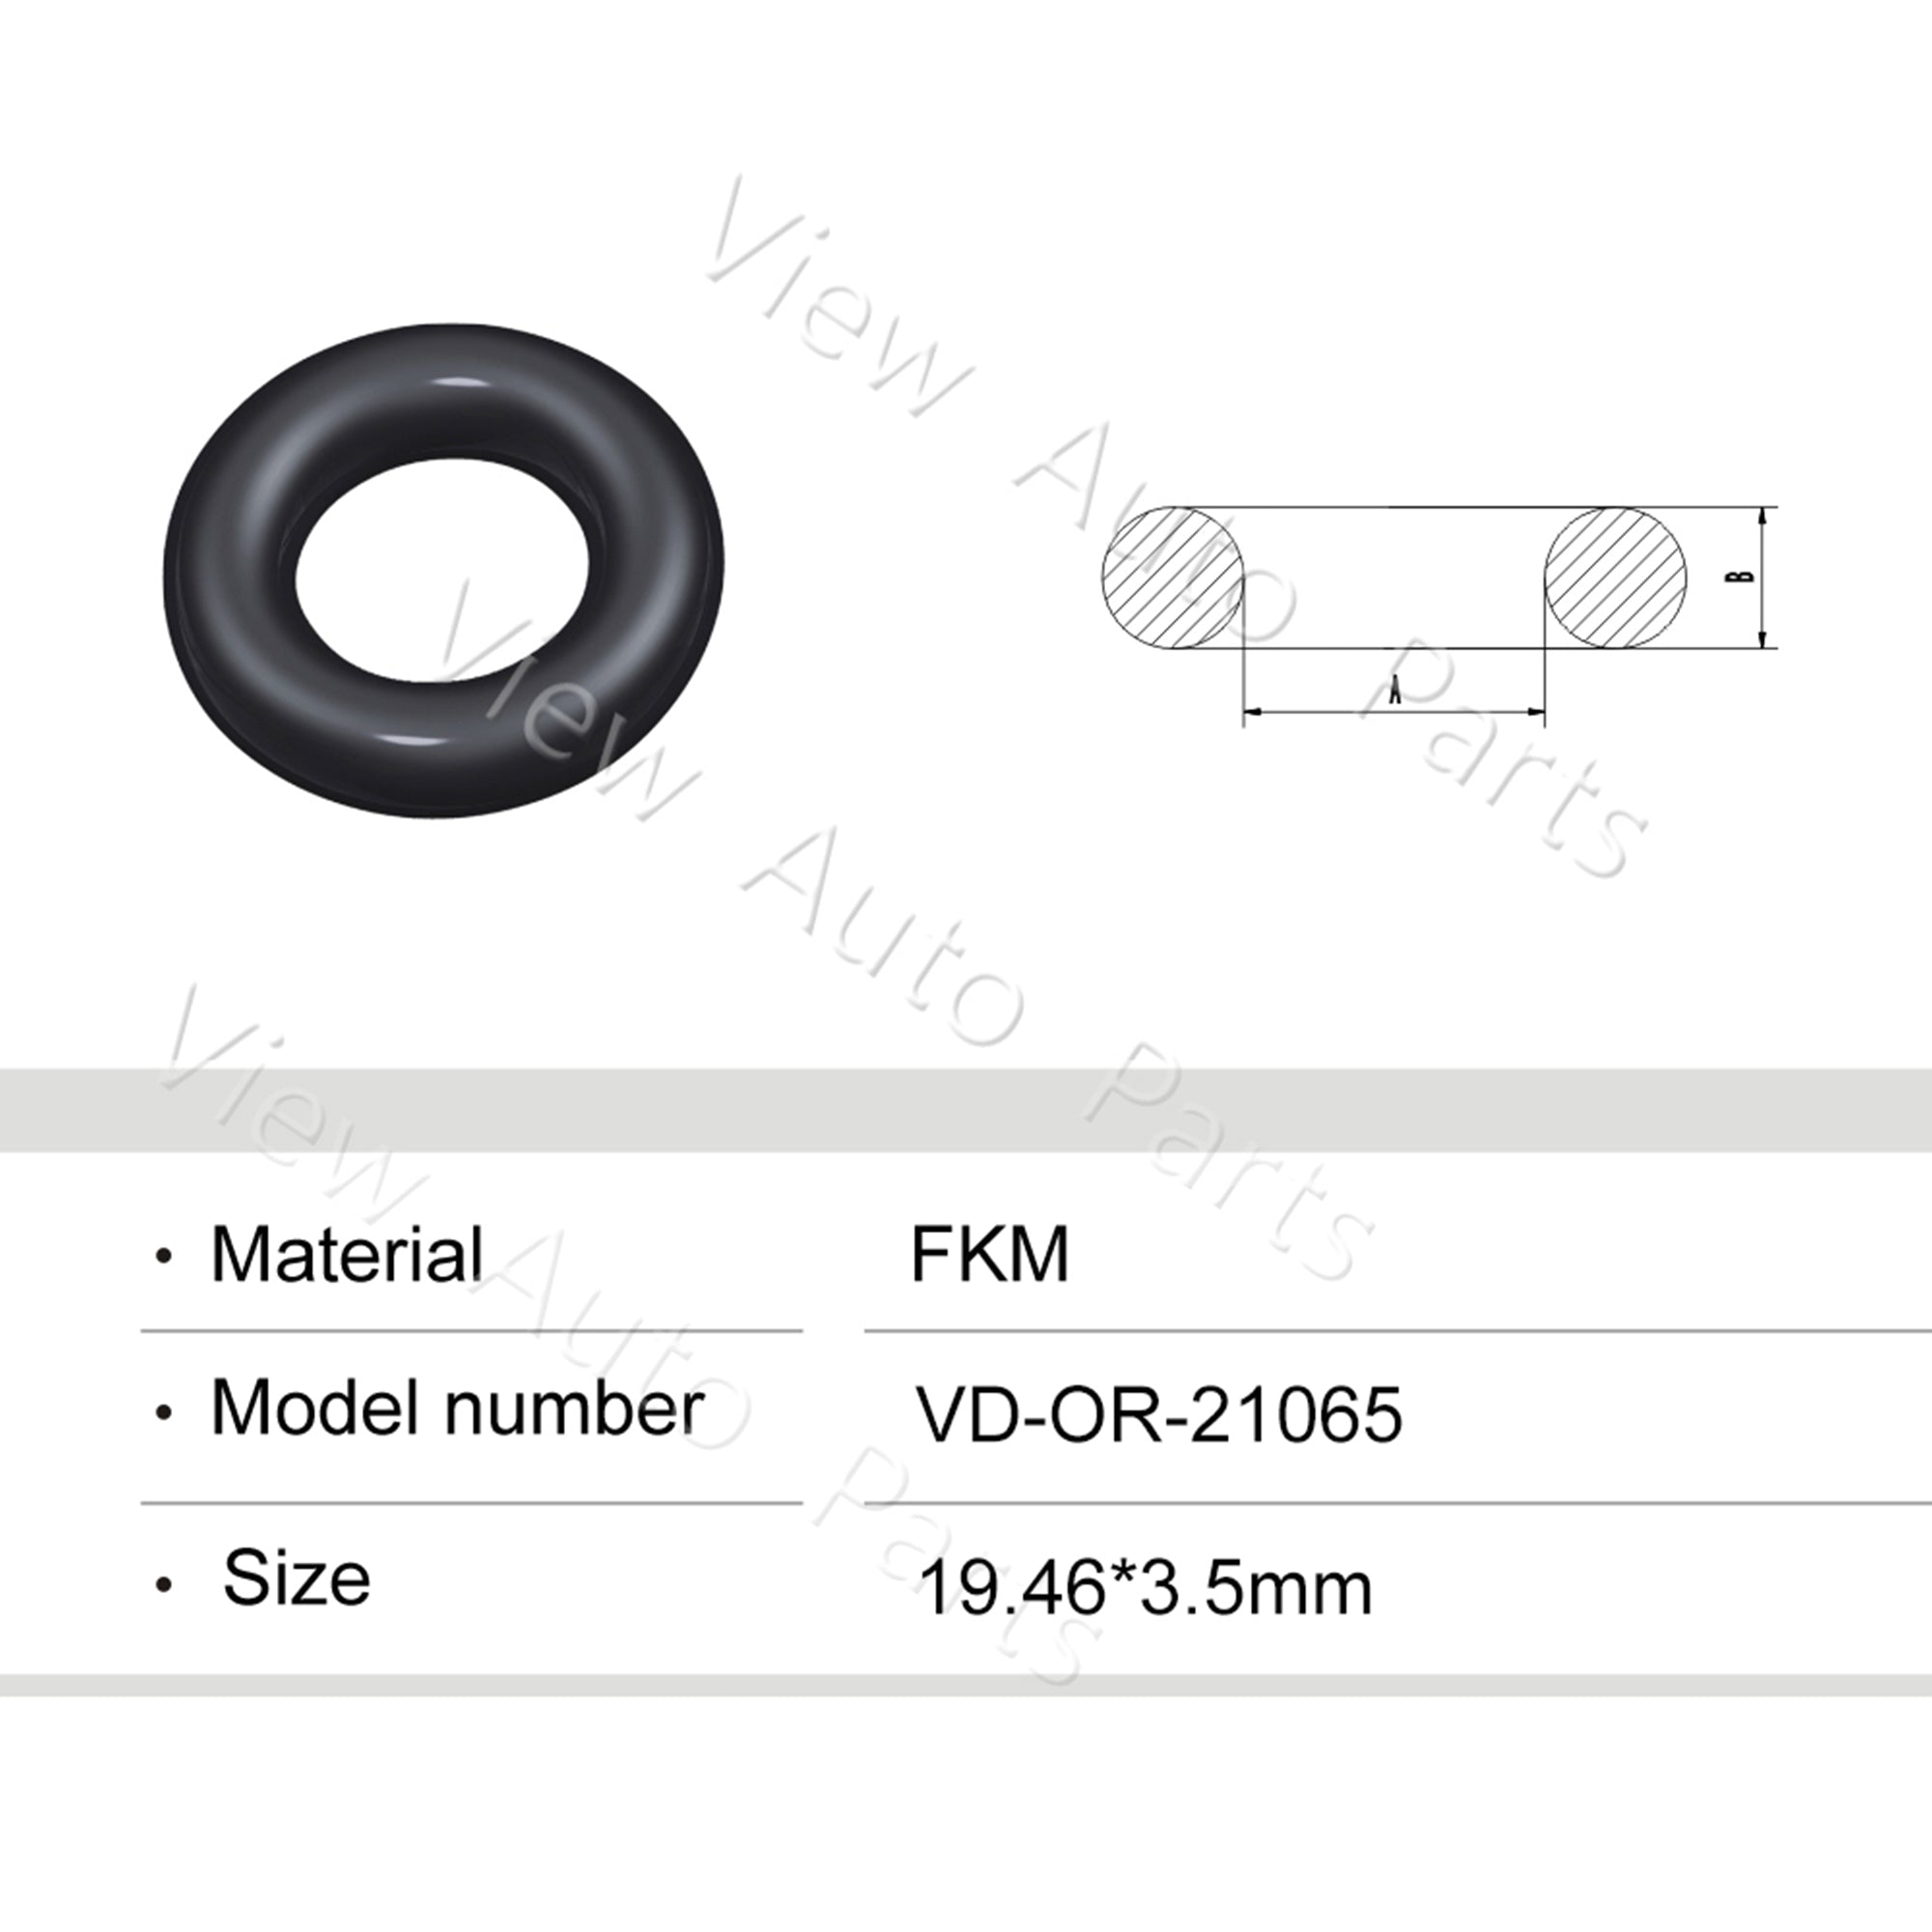 Fuel Injector Rubber Seal Orings for Mazda Nissan Car Fuel Injector Repair Kits FKM & Rubber Heat Resistant, Size: 19.46*3.5mm OR-21065